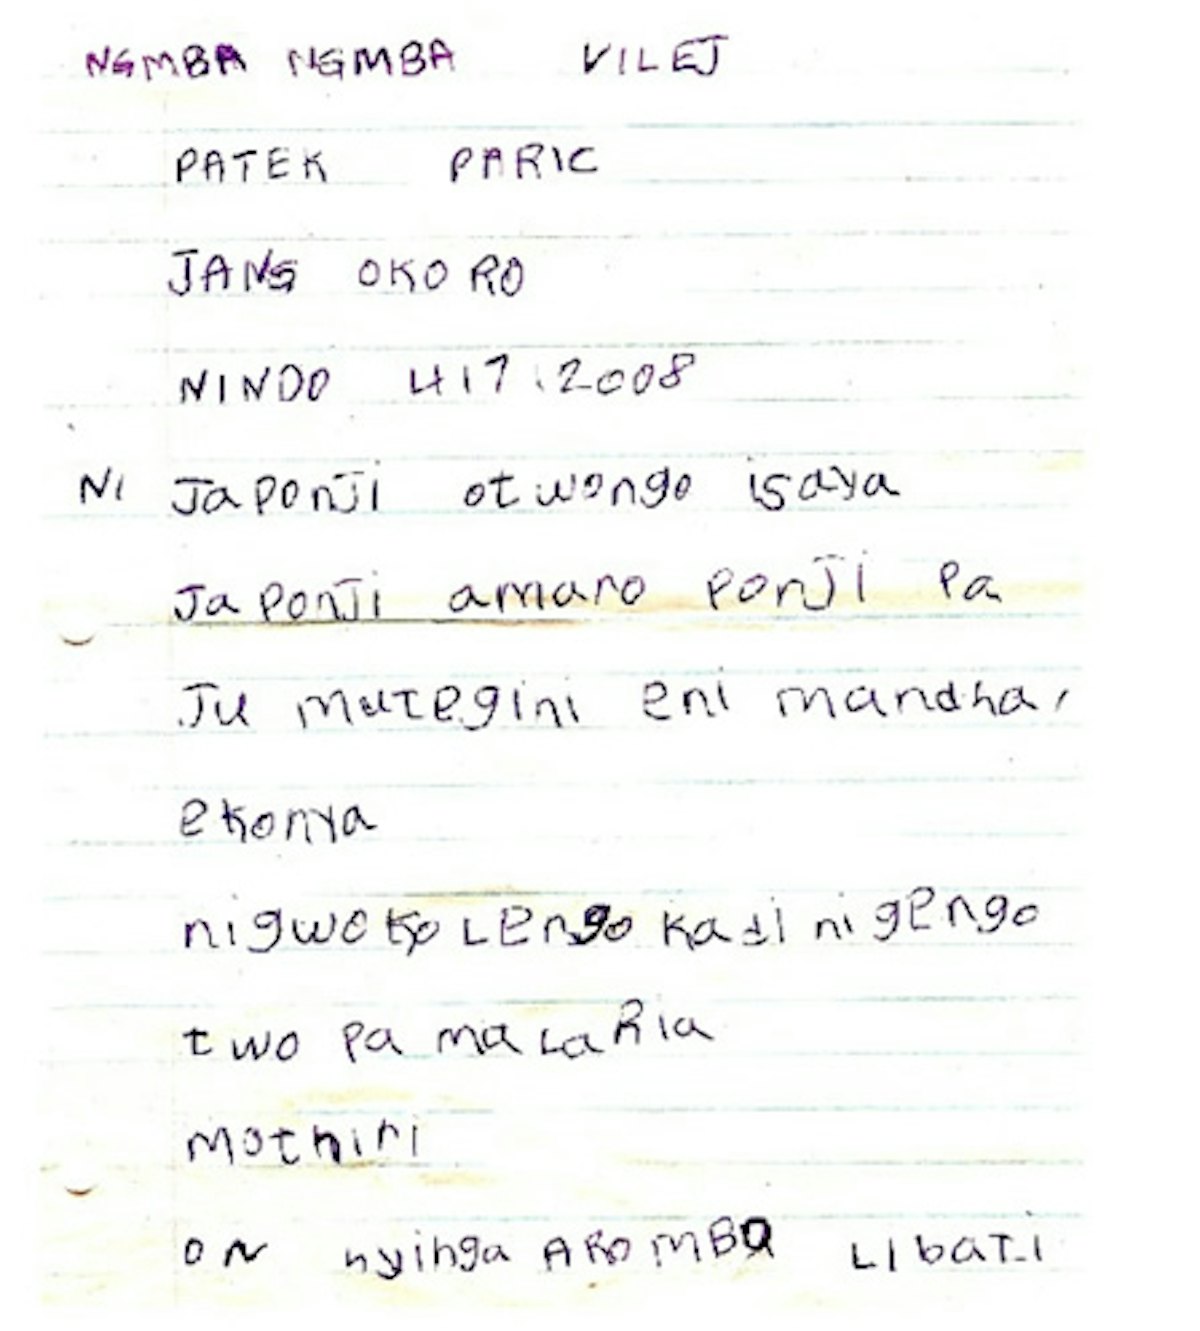 A villager named Arombo Libati, who has just learned to write, sends a note of greeting to the teacher. The original letter is in the Alur language. Part of the translation reads: "I love adult literacy program very much. It helps me to keep cleanliness in my home and prevention of malaria."